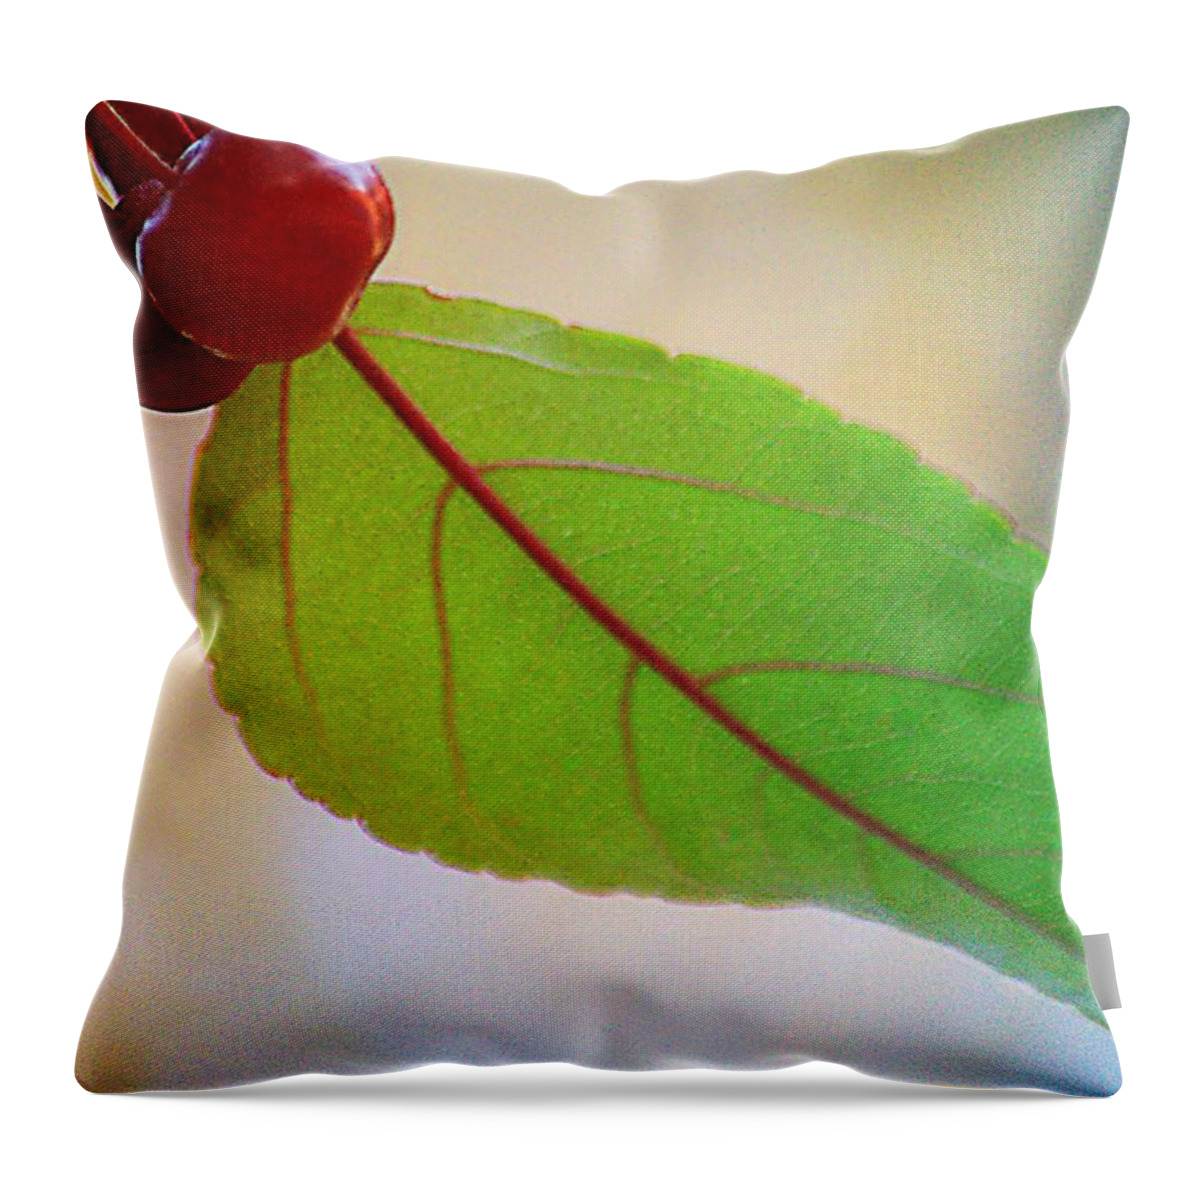 Art Throw Pillow featuring the photograph Crabapple Leaf by Joan Han